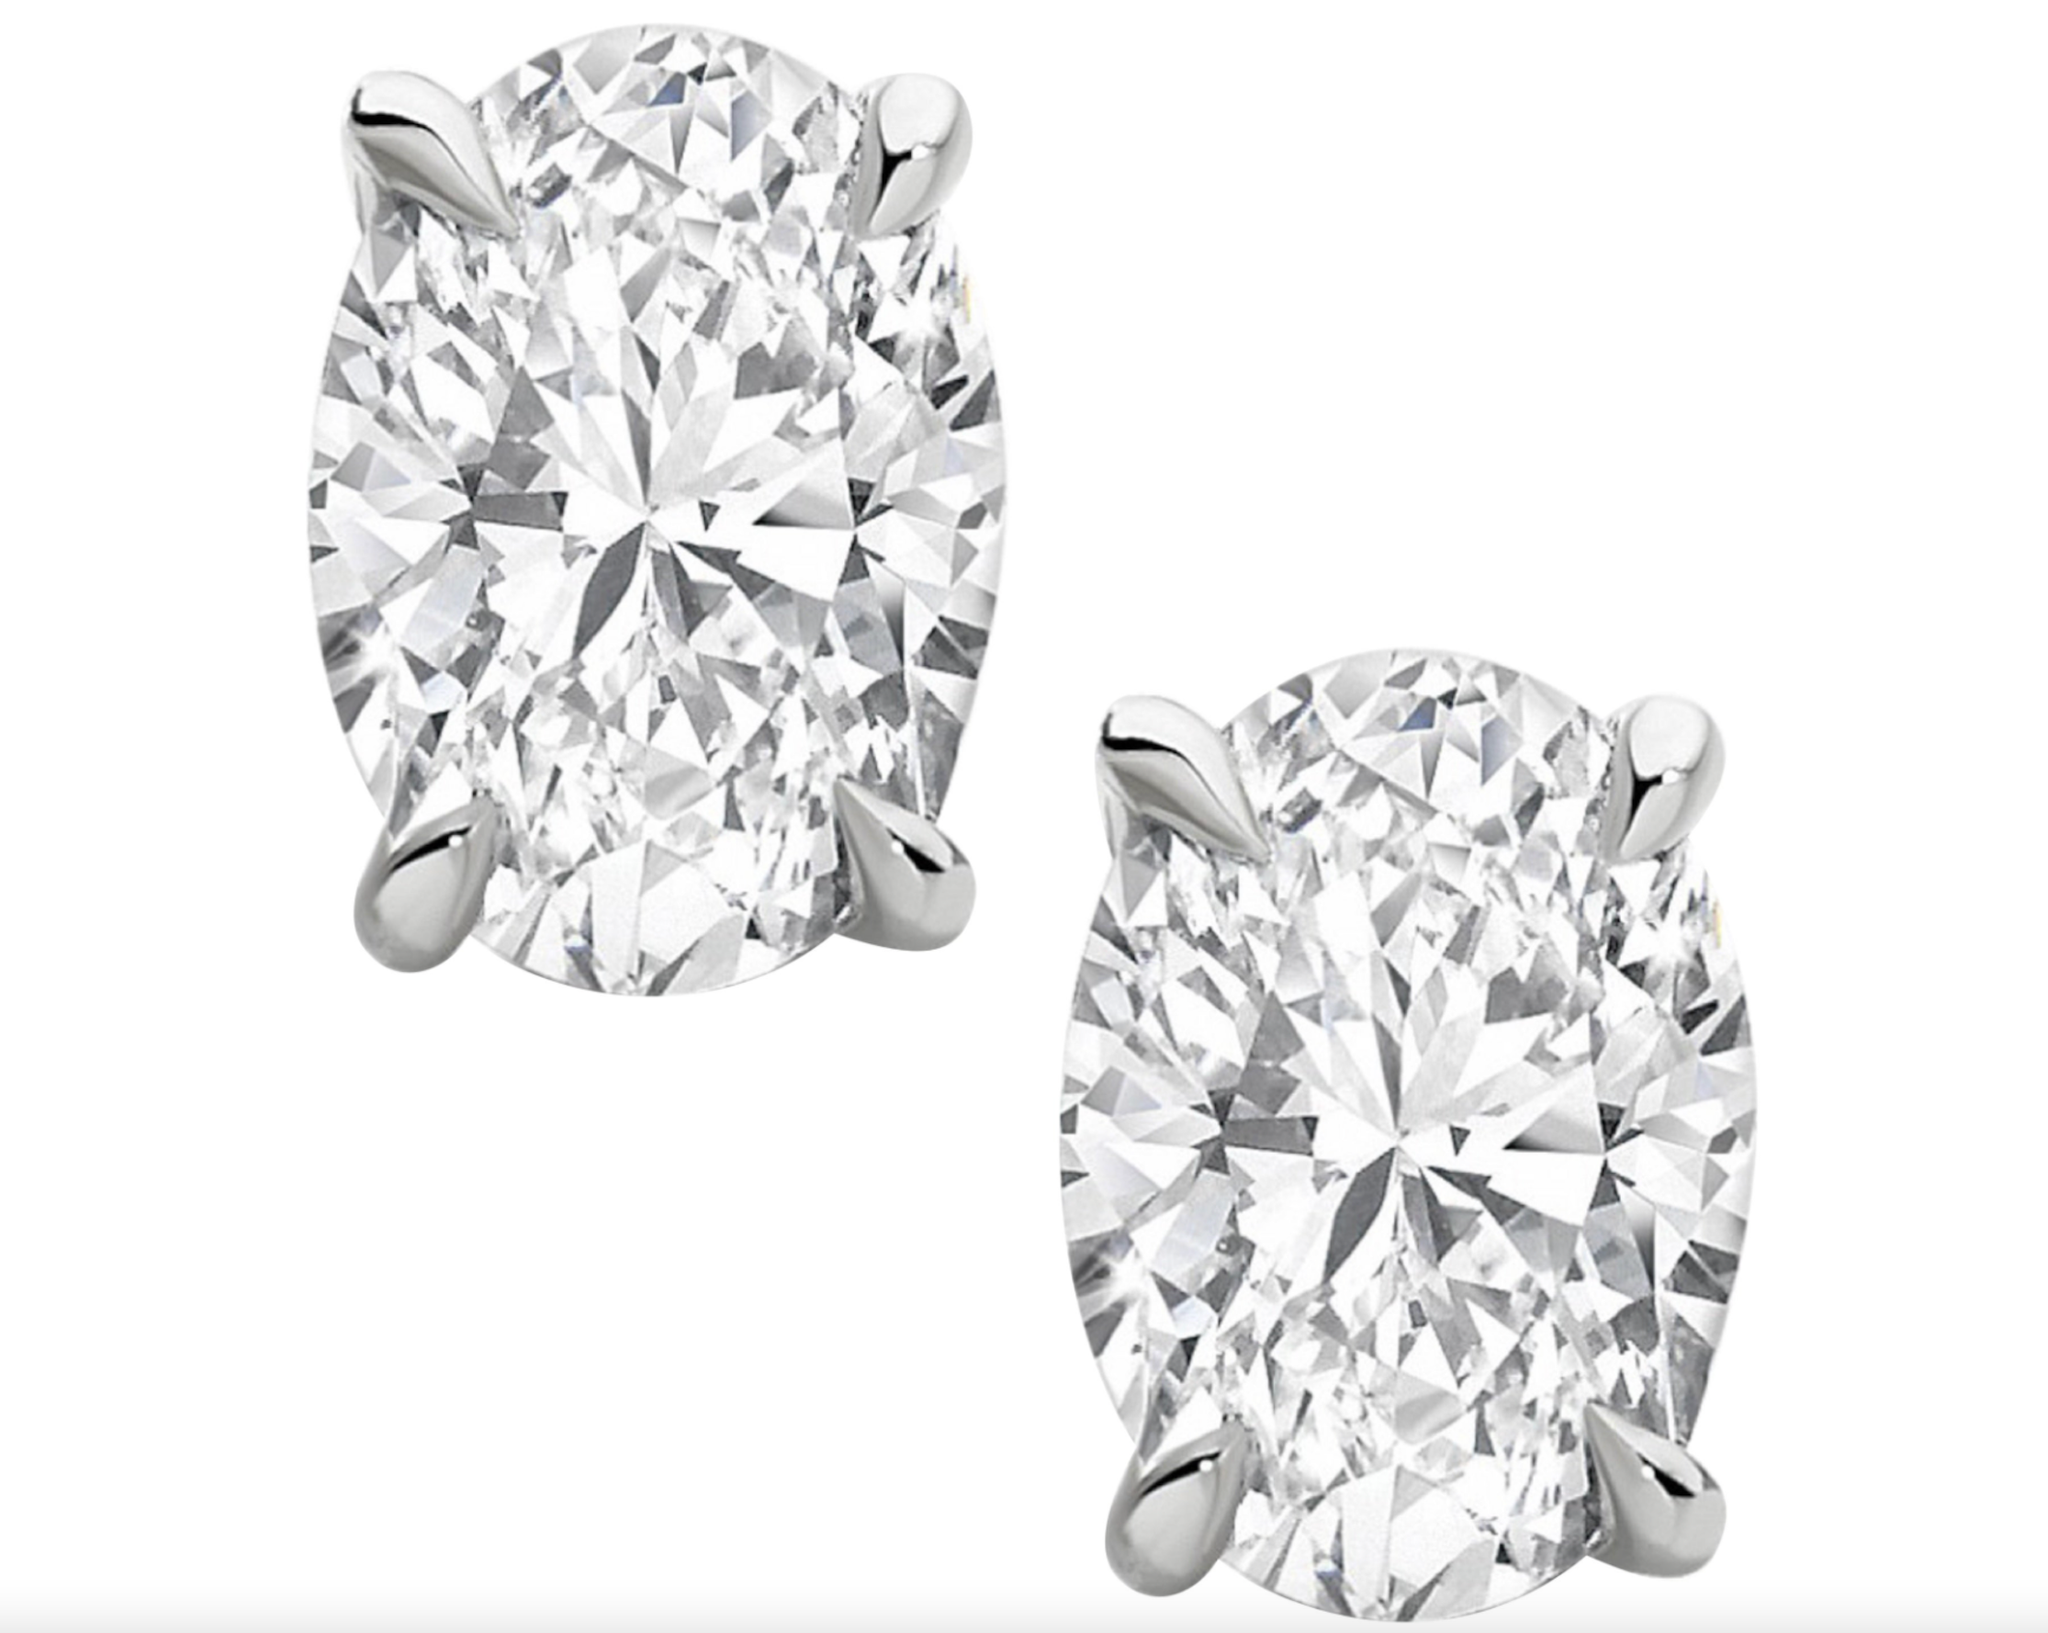 Diamond Stud Earrings Oval Cut 8 Carat Earring in Platinum 4 prong Front View